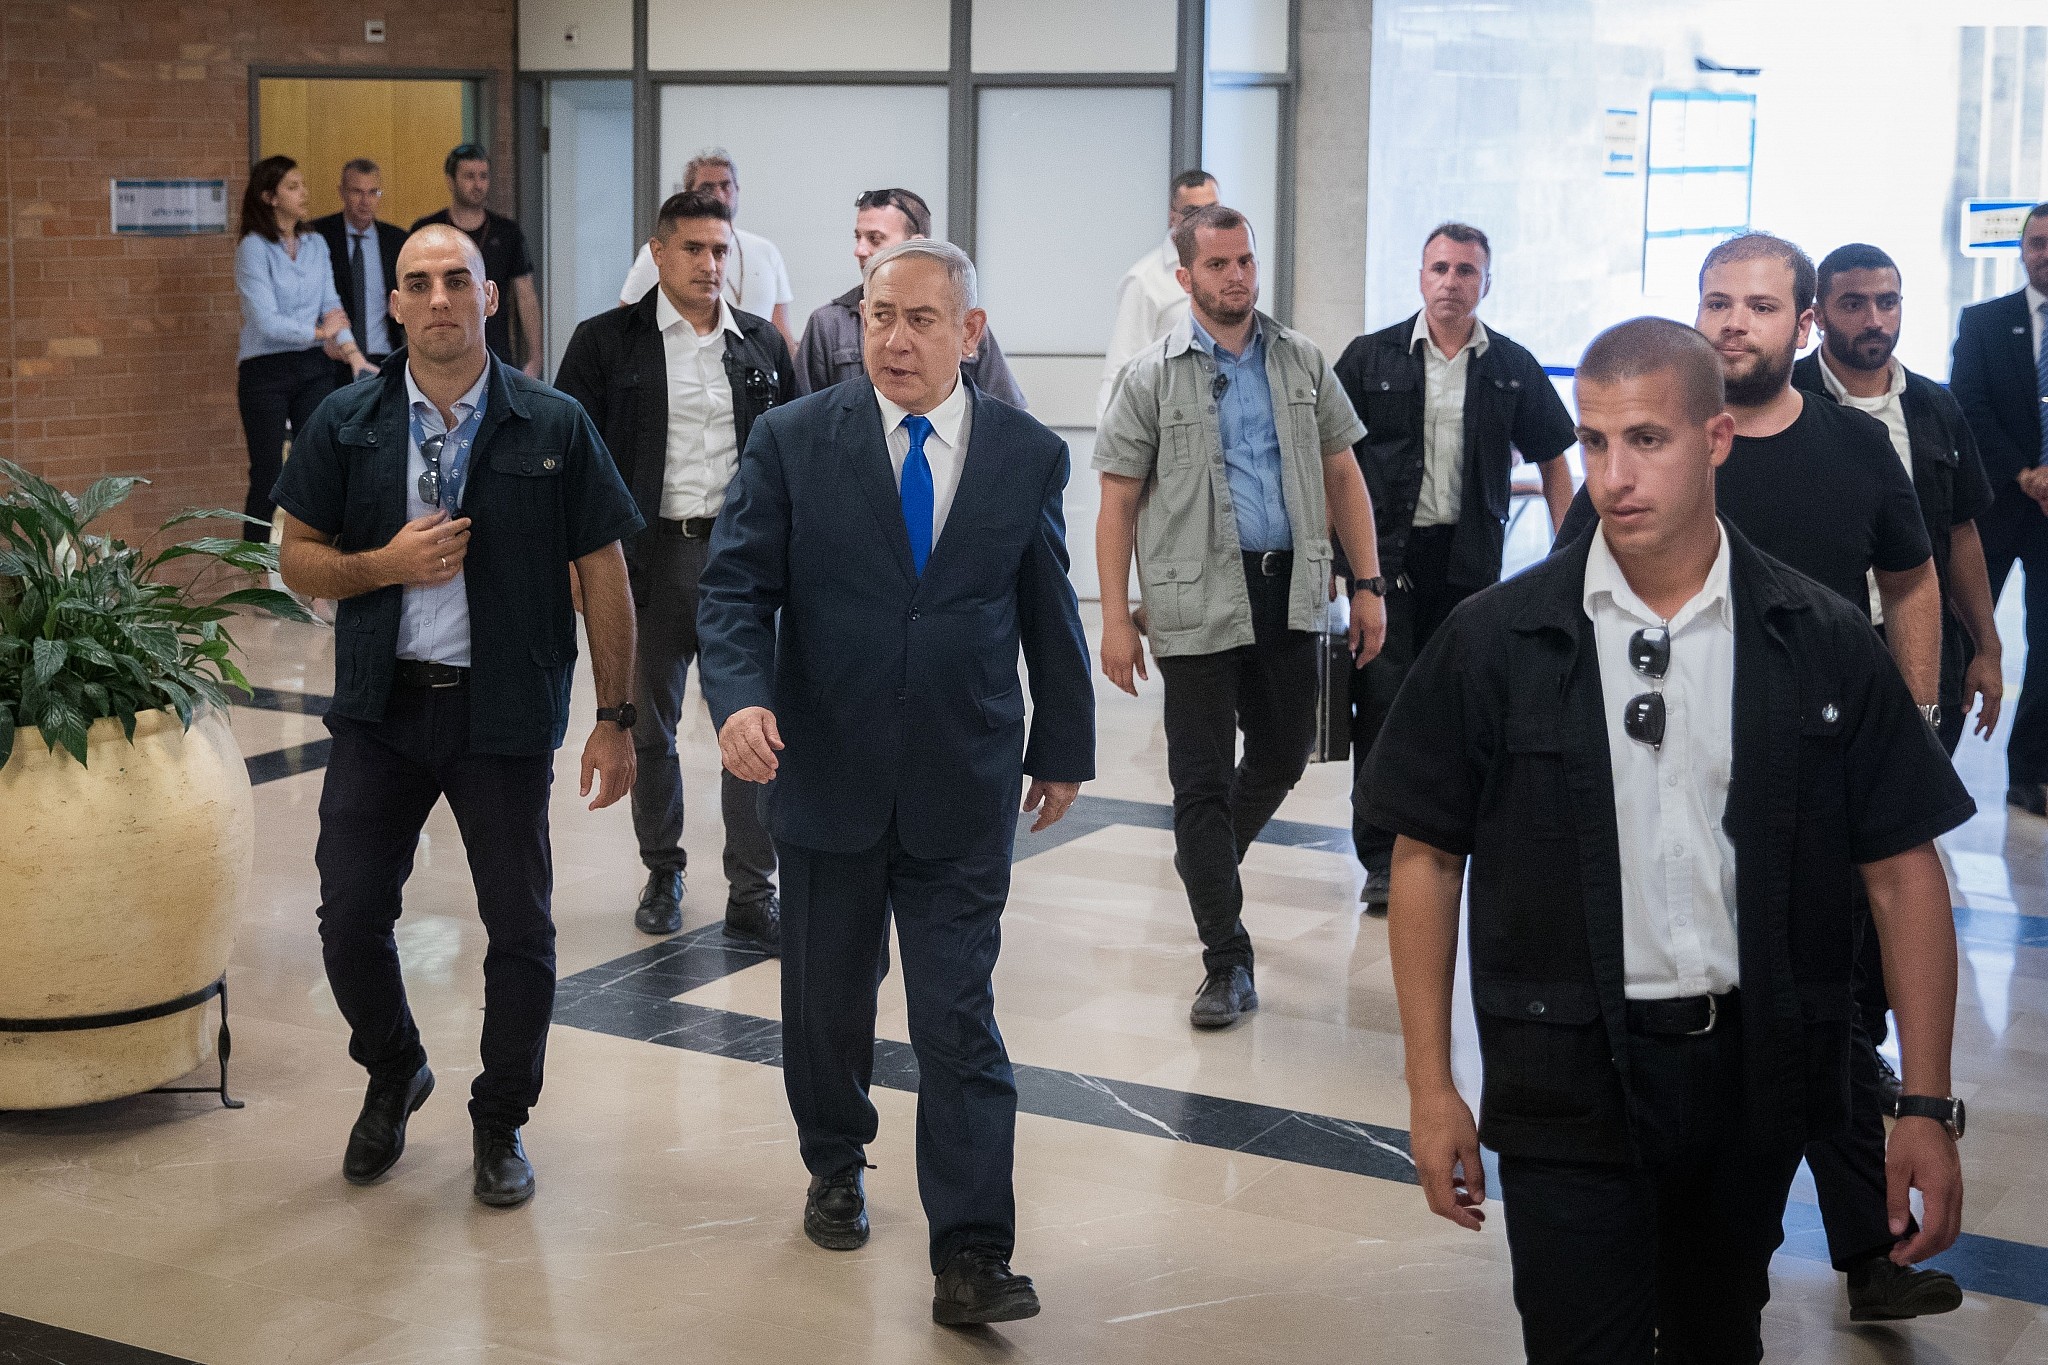 Guard at Netanyahu home injured after gun accidentally goes off